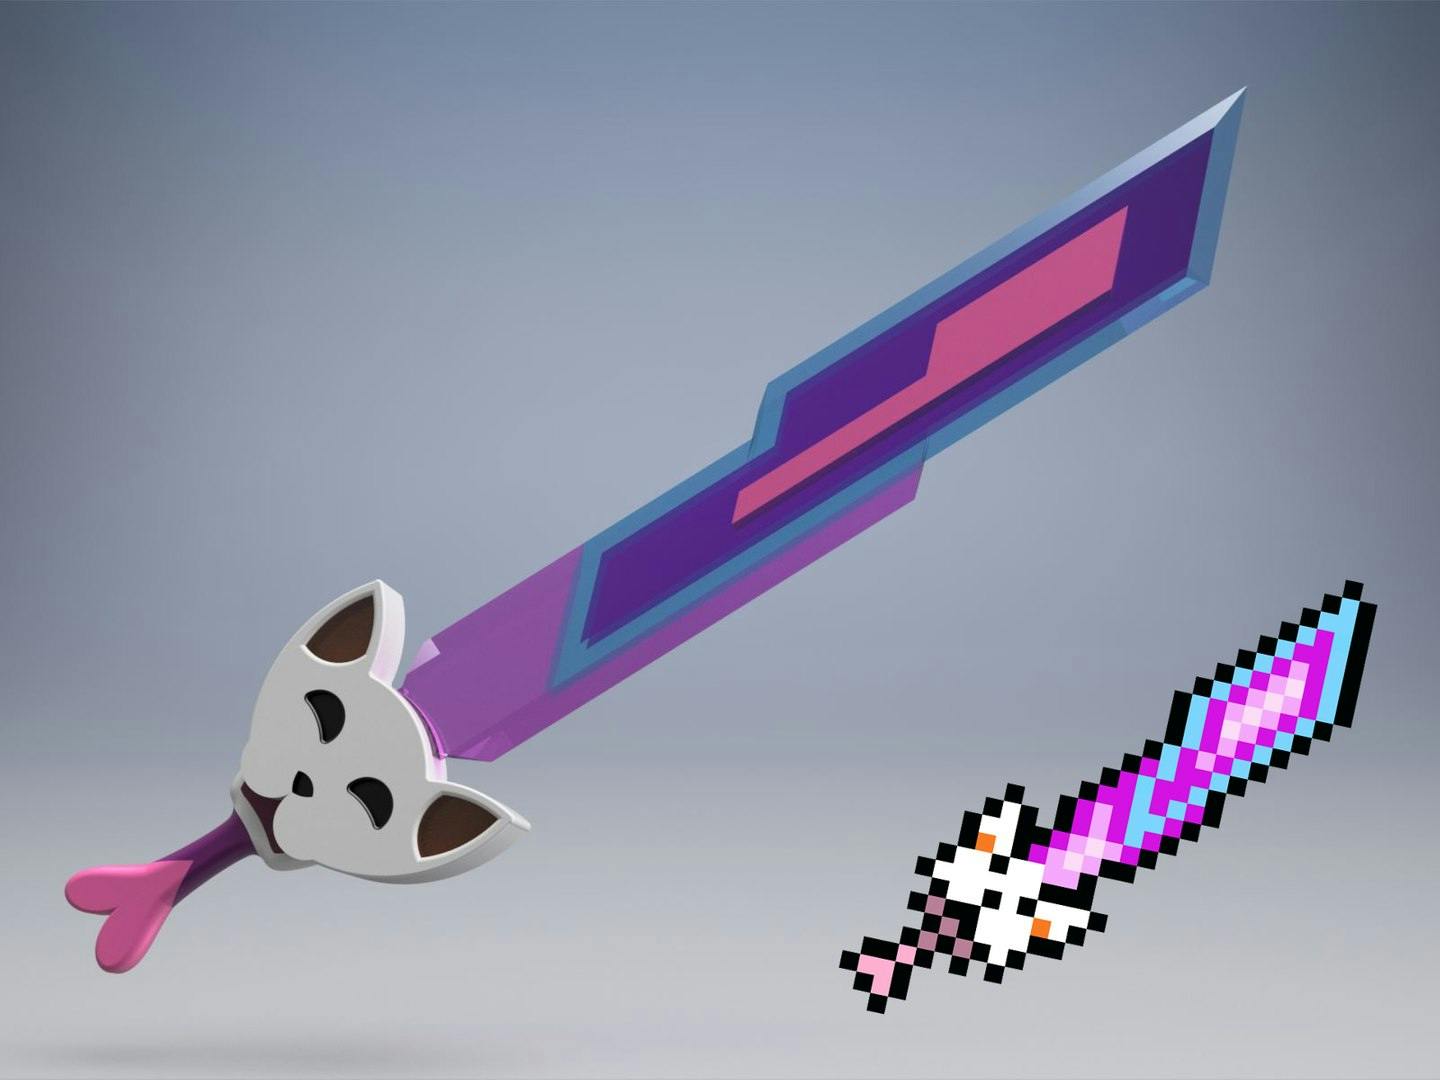 It's the Meowmere Sword!